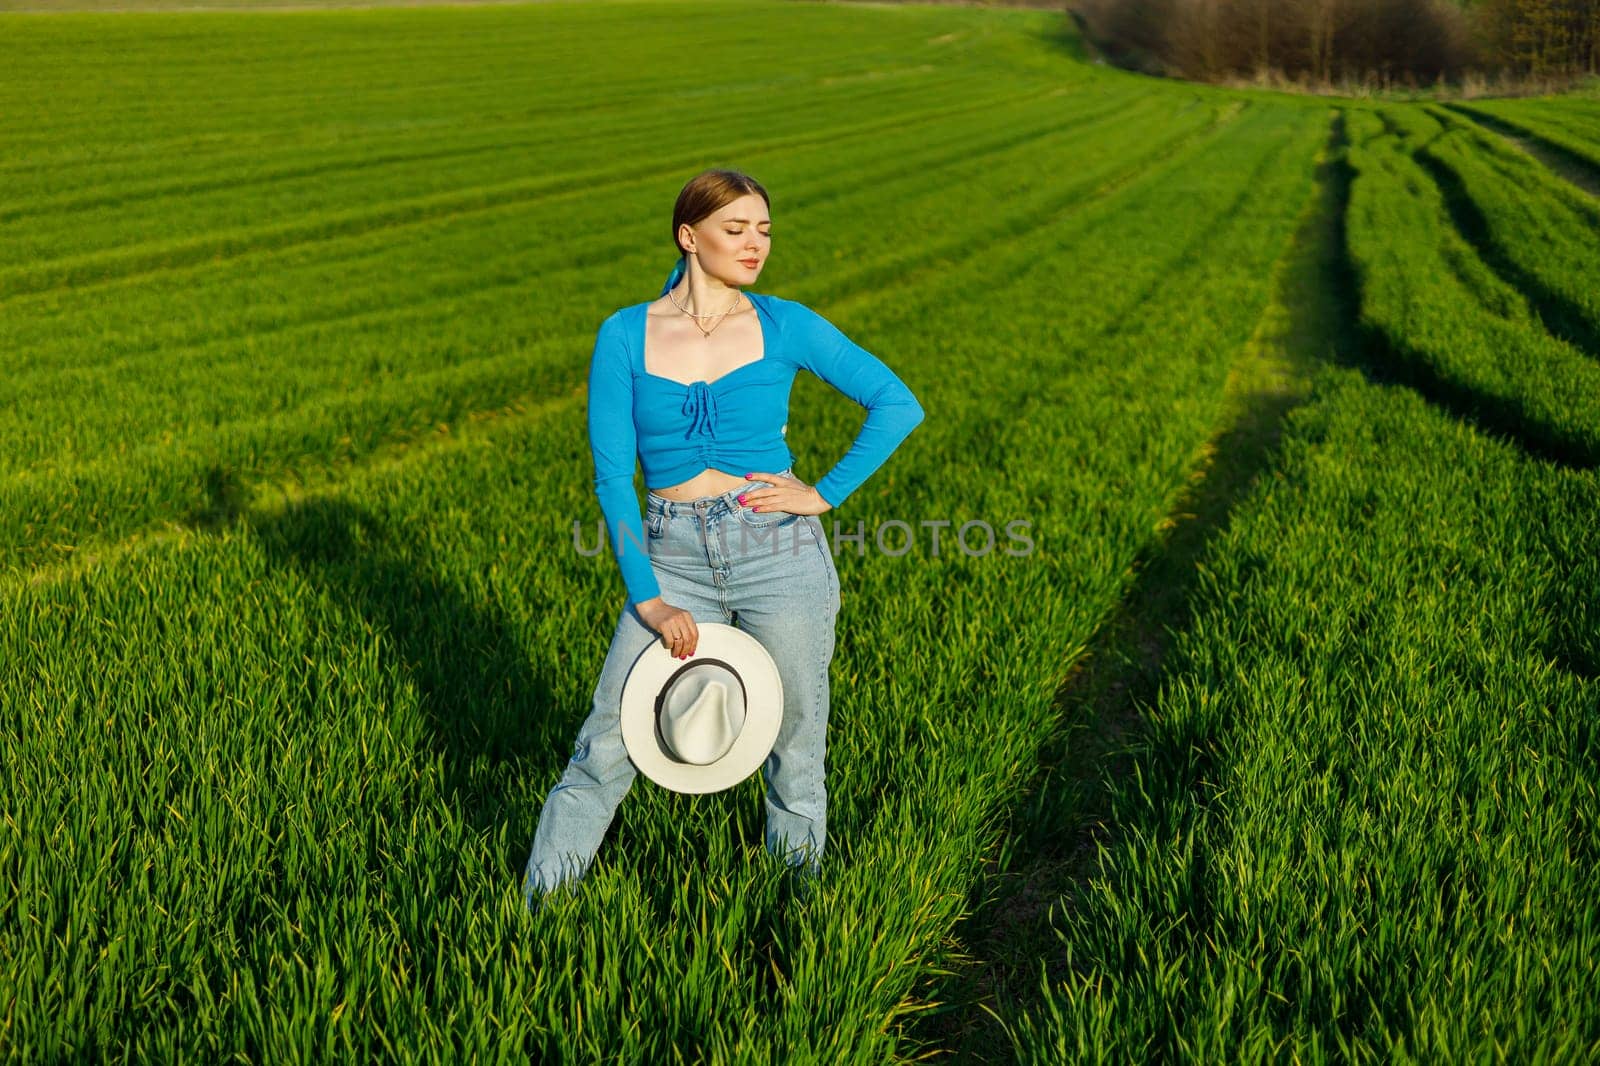 A cute woman in jeans and a hat stands in a green field. A smiling woman in a blue top and jeans walks in the green grass.